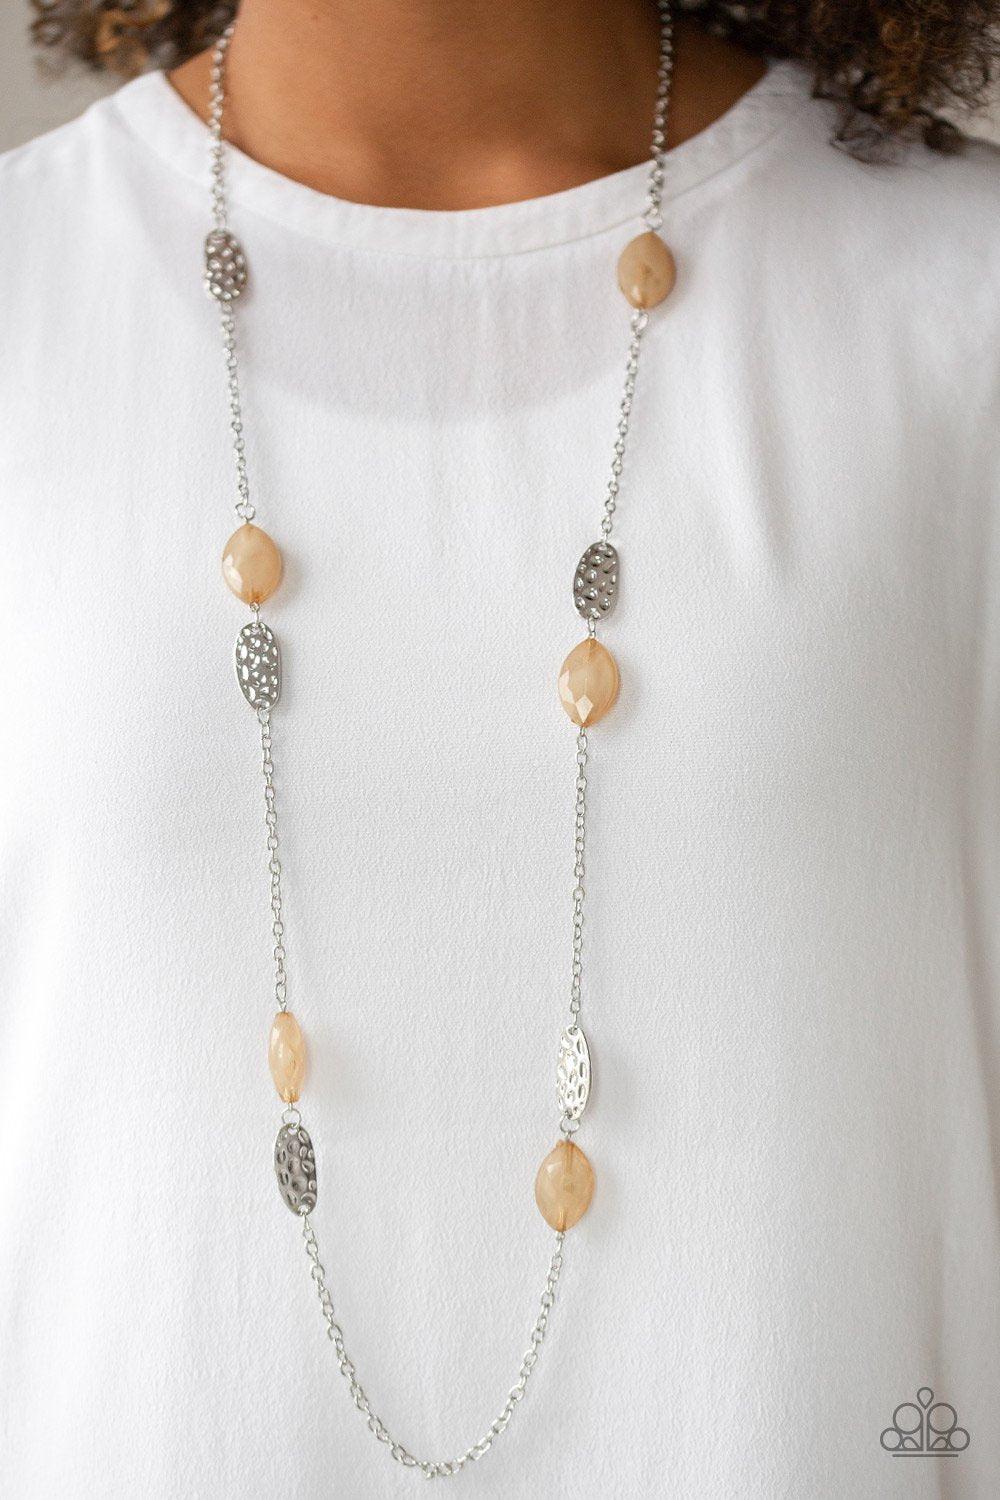 Beachfront Beauty Brown Necklace - Paparazzi Accessories-CarasShop.com - $5 Jewelry by Cara Jewels